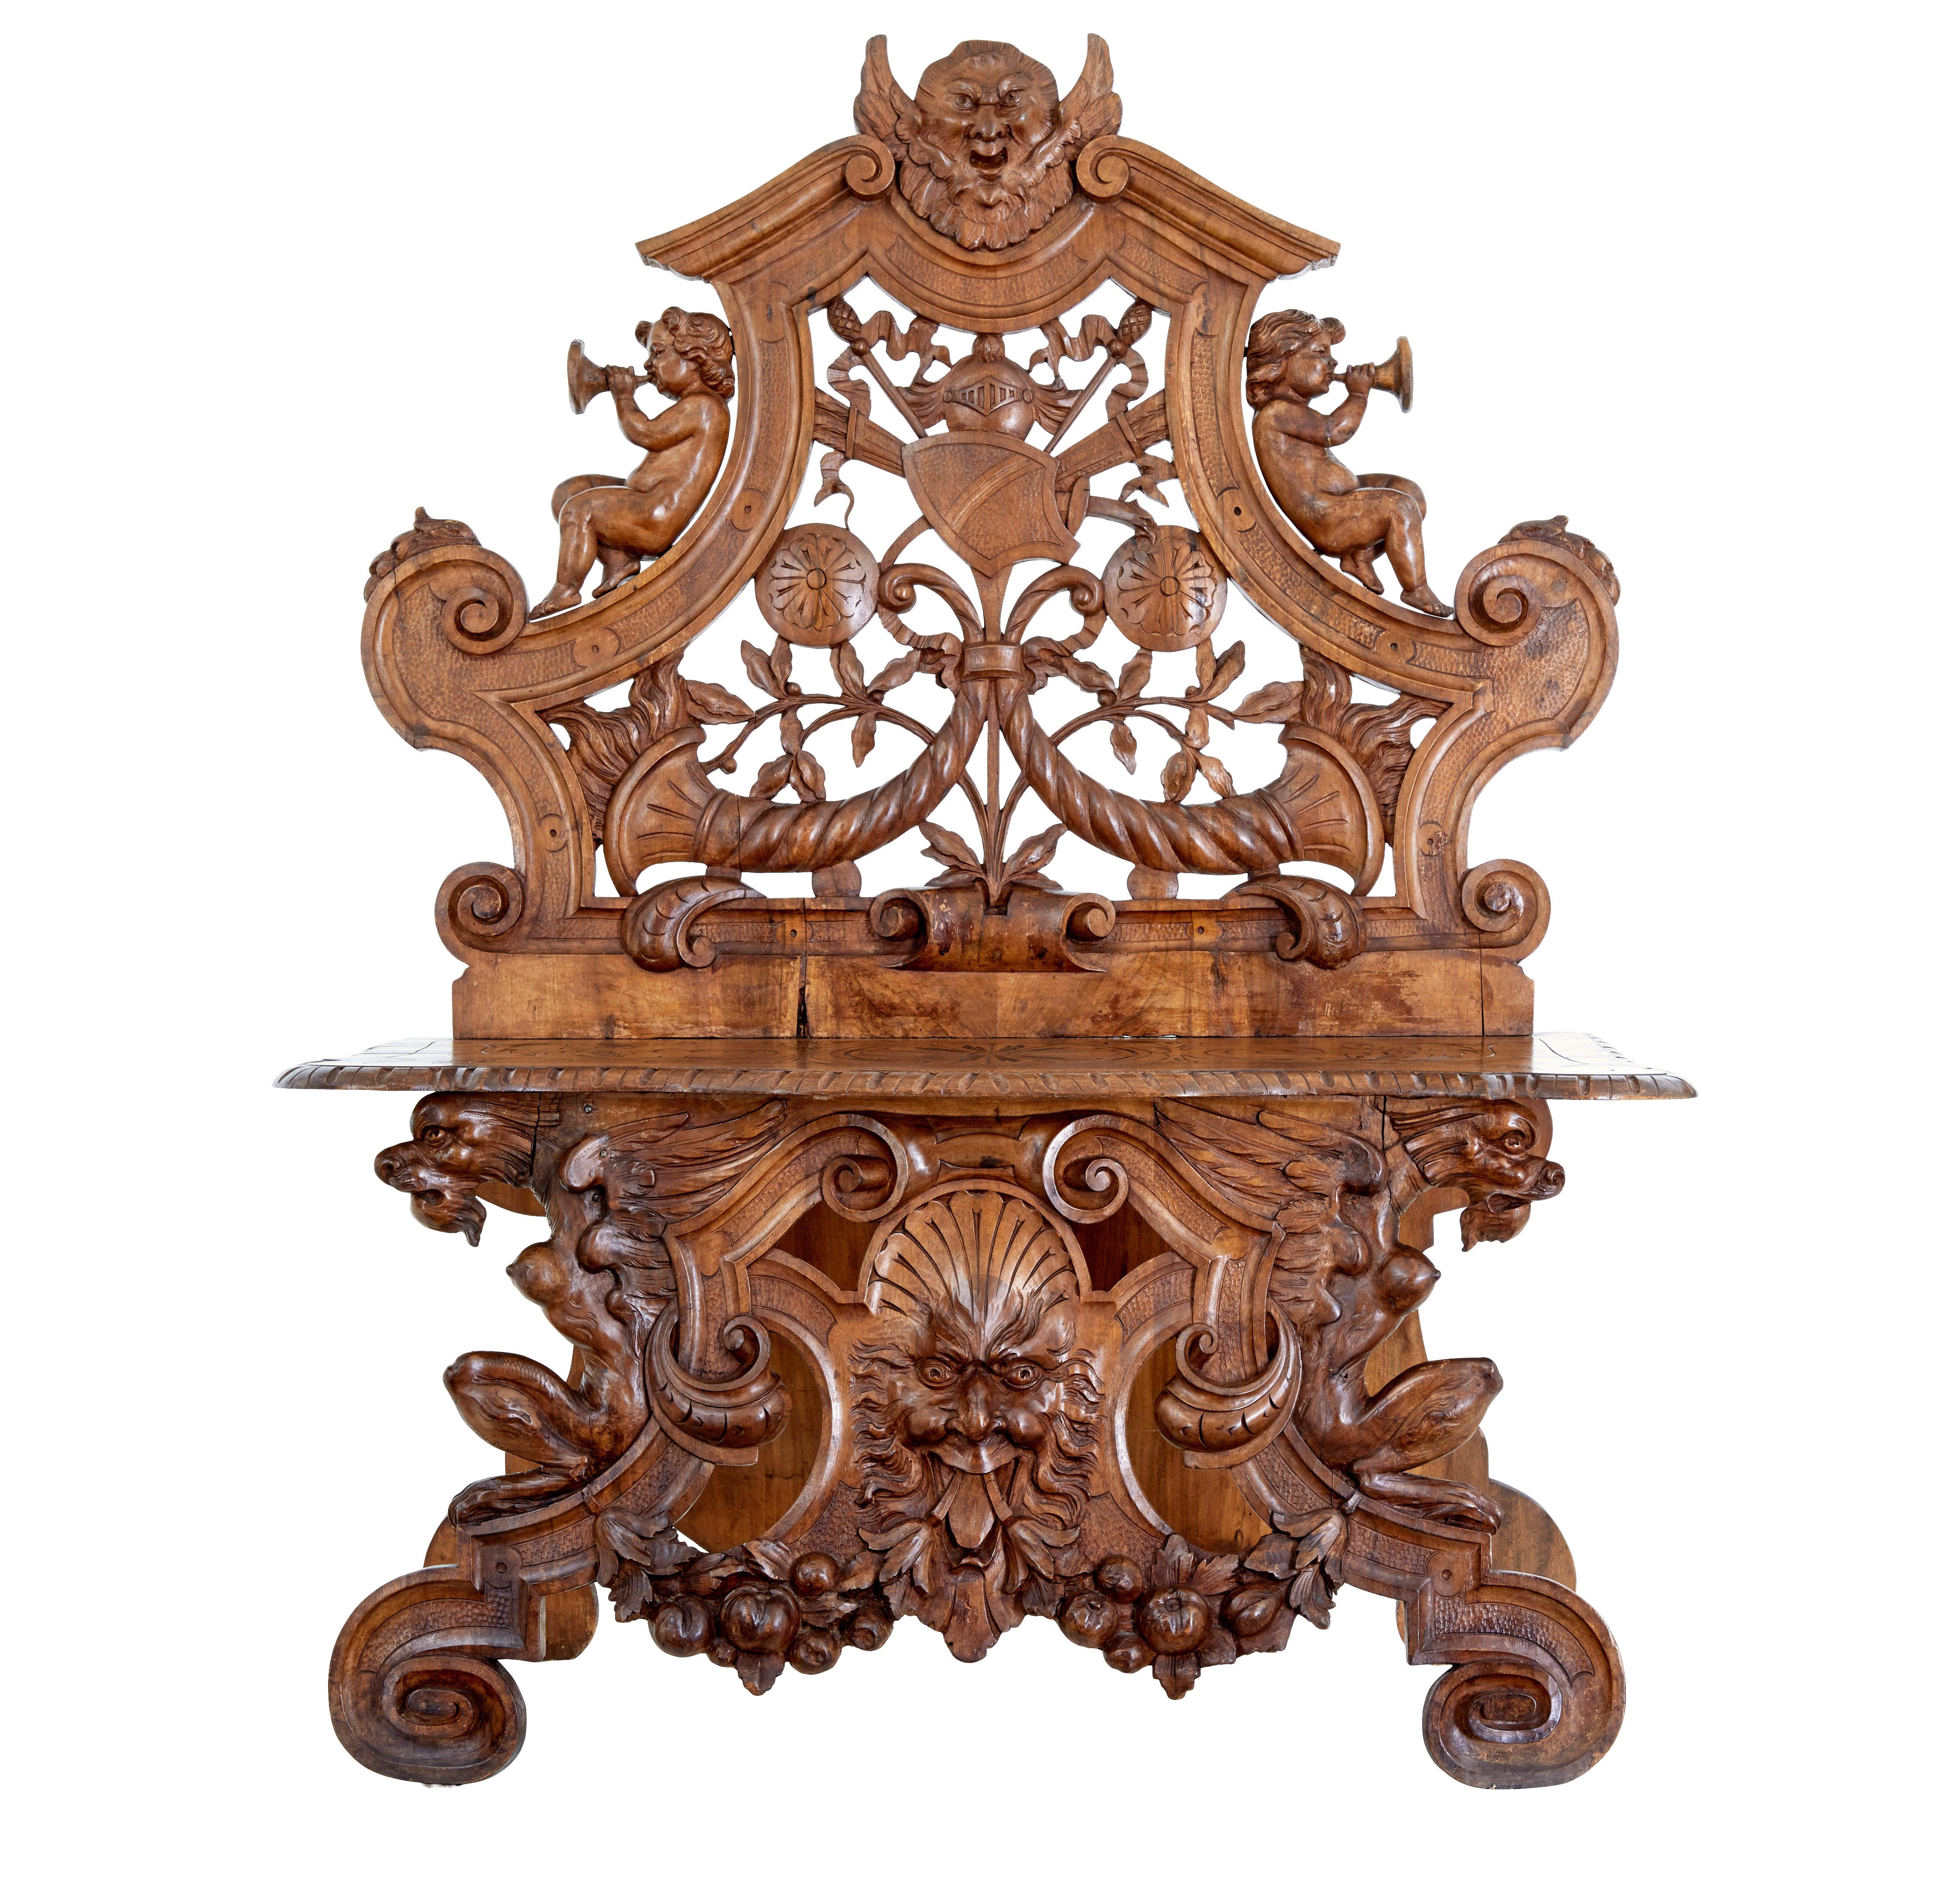 19th century heavily carved flemish walnut decorative chair circa 1890.

Carved back rest with mythical head, cherubs, armorial design and cornucopia.  Carved pattern to the shaped seat.  Front  legs with carved griffins, scrolls and a further